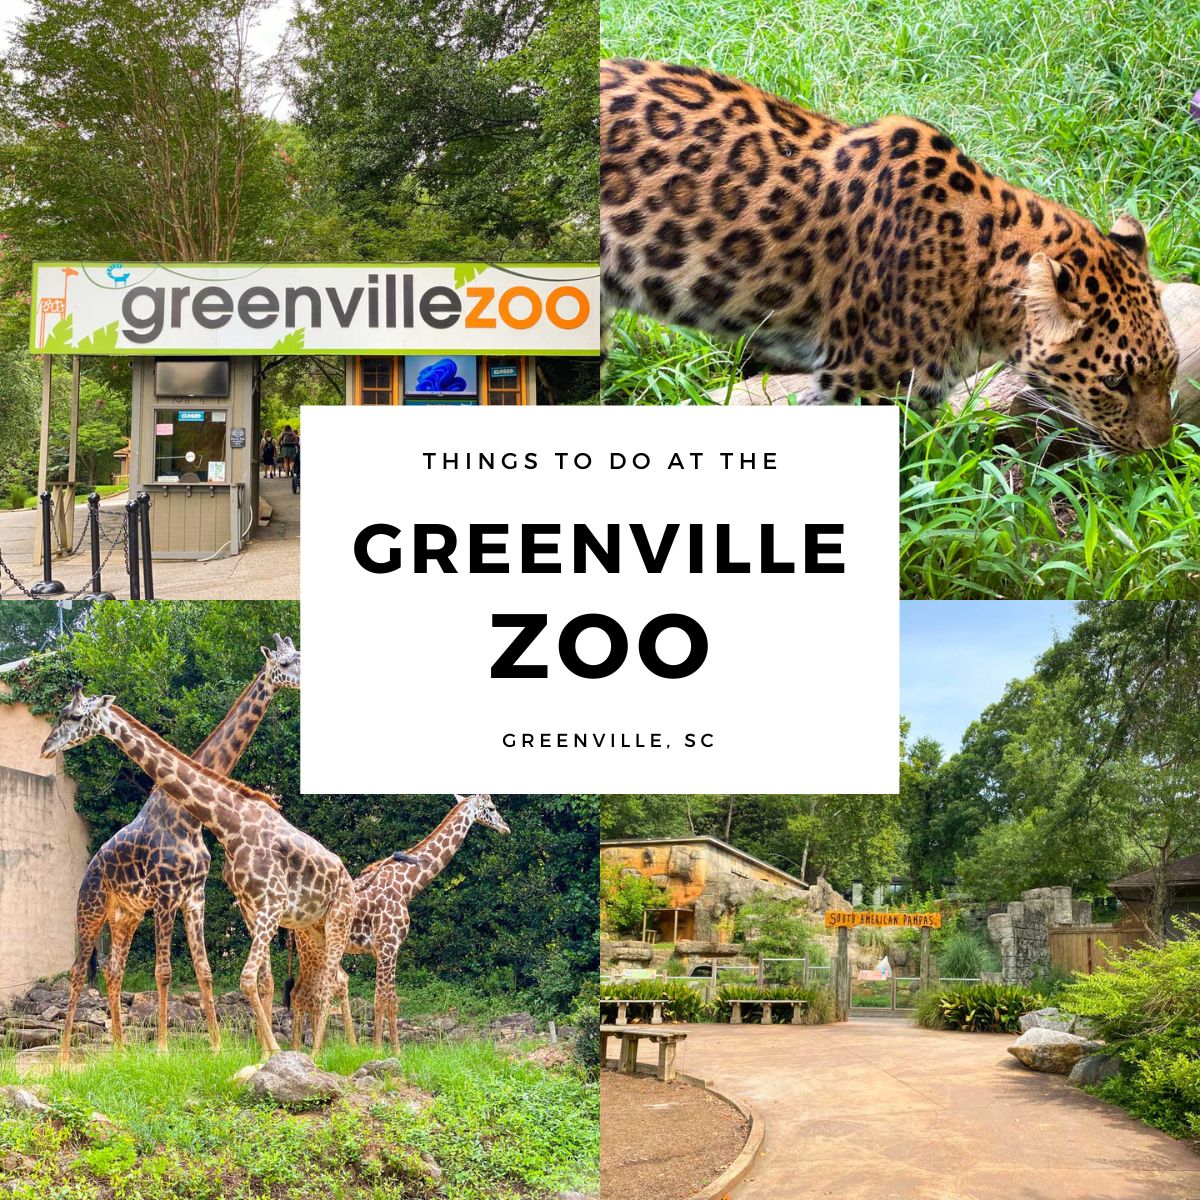 A photo collage shows a few of the animals and the entrance to the Greenville Zoo.